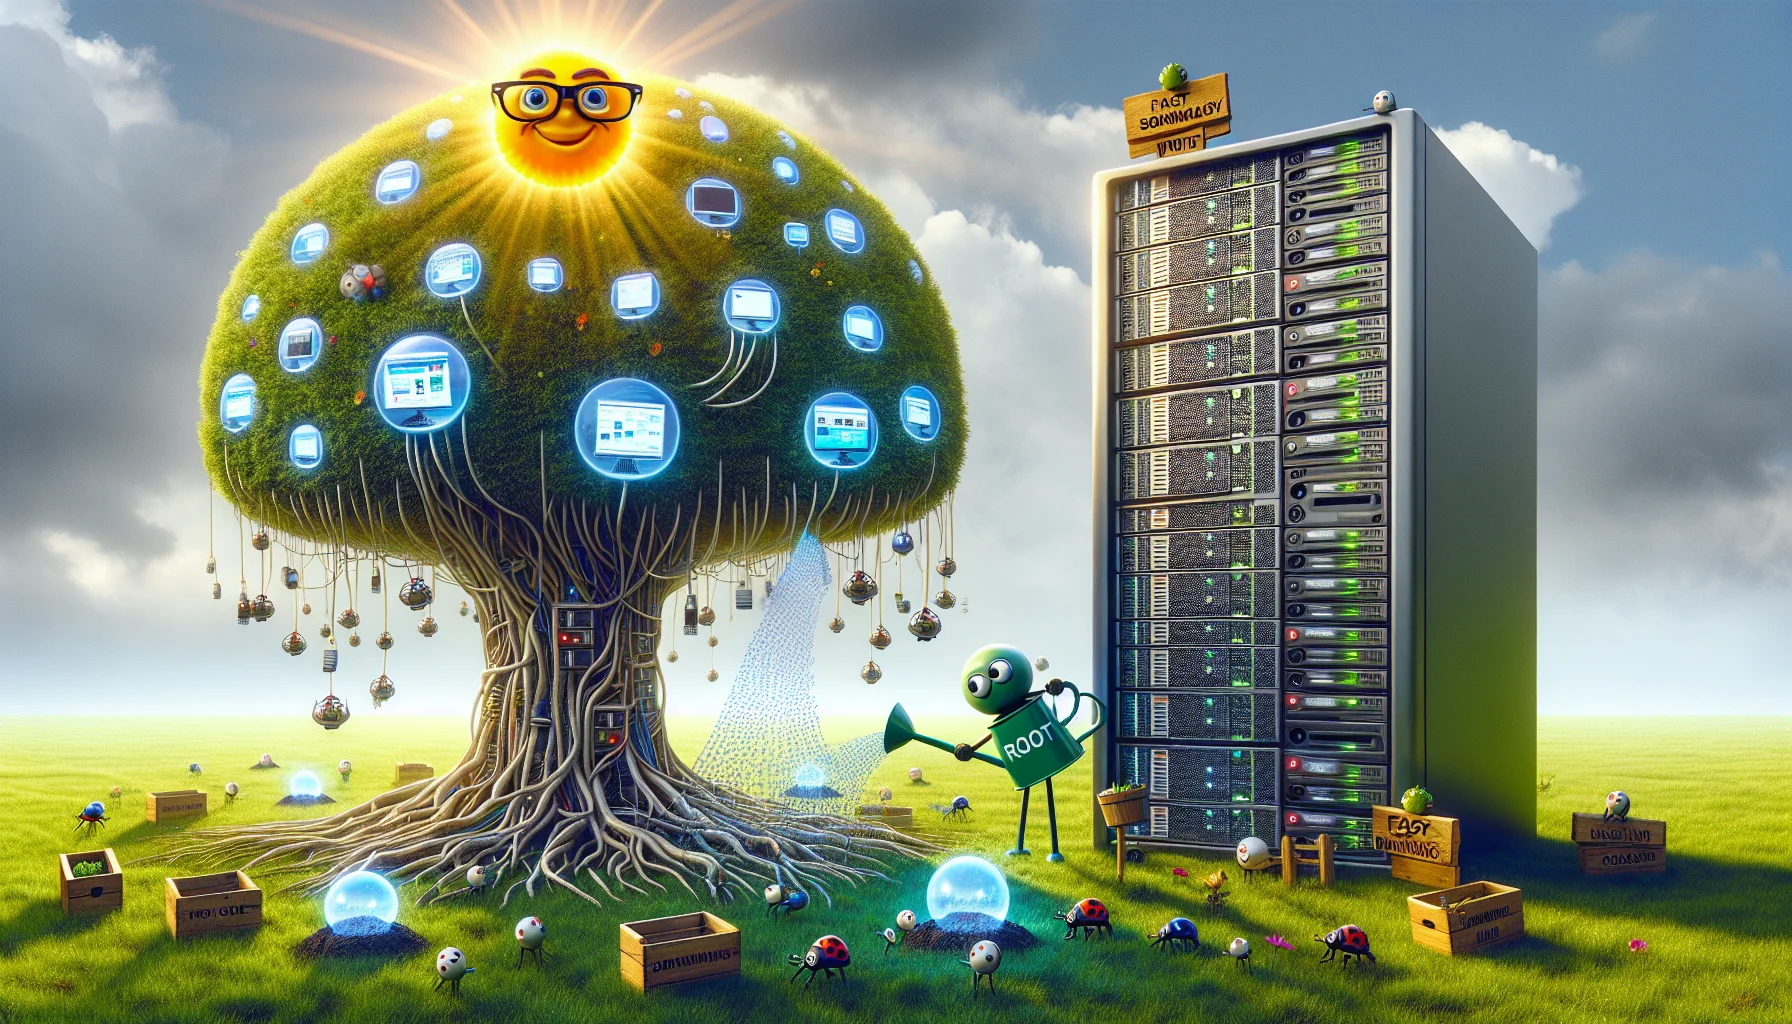 Create a humorous, highly detailed image to illustrate the concept of a virtual private server (VPS) hosting service. Picture a surreal scene: a computer server, portrayed as a high-tech tree, stands tall in a lush green field under a clear sky. The 'fruits' of this tree are luminous orbs, symbolizing different websites. Each orb showcases a dynamically-designed website, animated with life from the traffic flowing to and from them. But there's a quirky twist: tiny cartoonish robots are busy working around the tree, digging up digital bugs, symbolizing security measures, and watering the 'root' directory with a watering can that says 'Fast Bandwidth'. To light the mood, add an amusing sun in the sky, wearing a pair of chunky glasses and a broad grin as it showers rays of 'uptime and reliability' over the scene. Let this serve as a playful metaphor for a robust, reliable, and secure web hosting service.